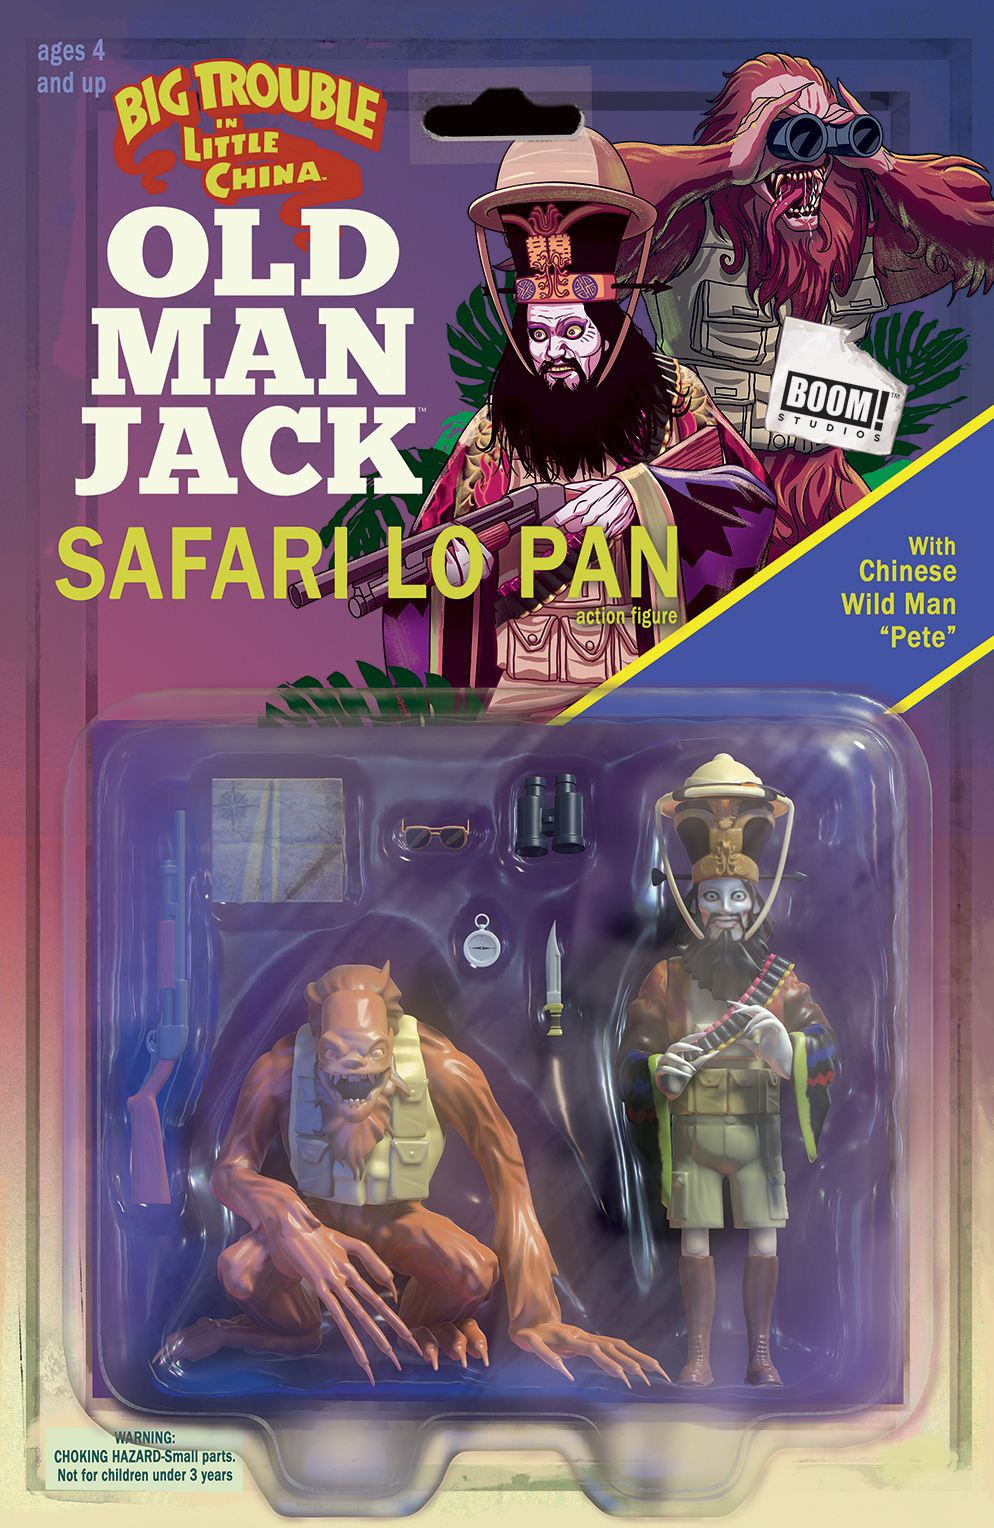 BIG TROUBLE IN LITTLE CHINA OLD MAN JACK #7 SUBSCRIPTION ACT